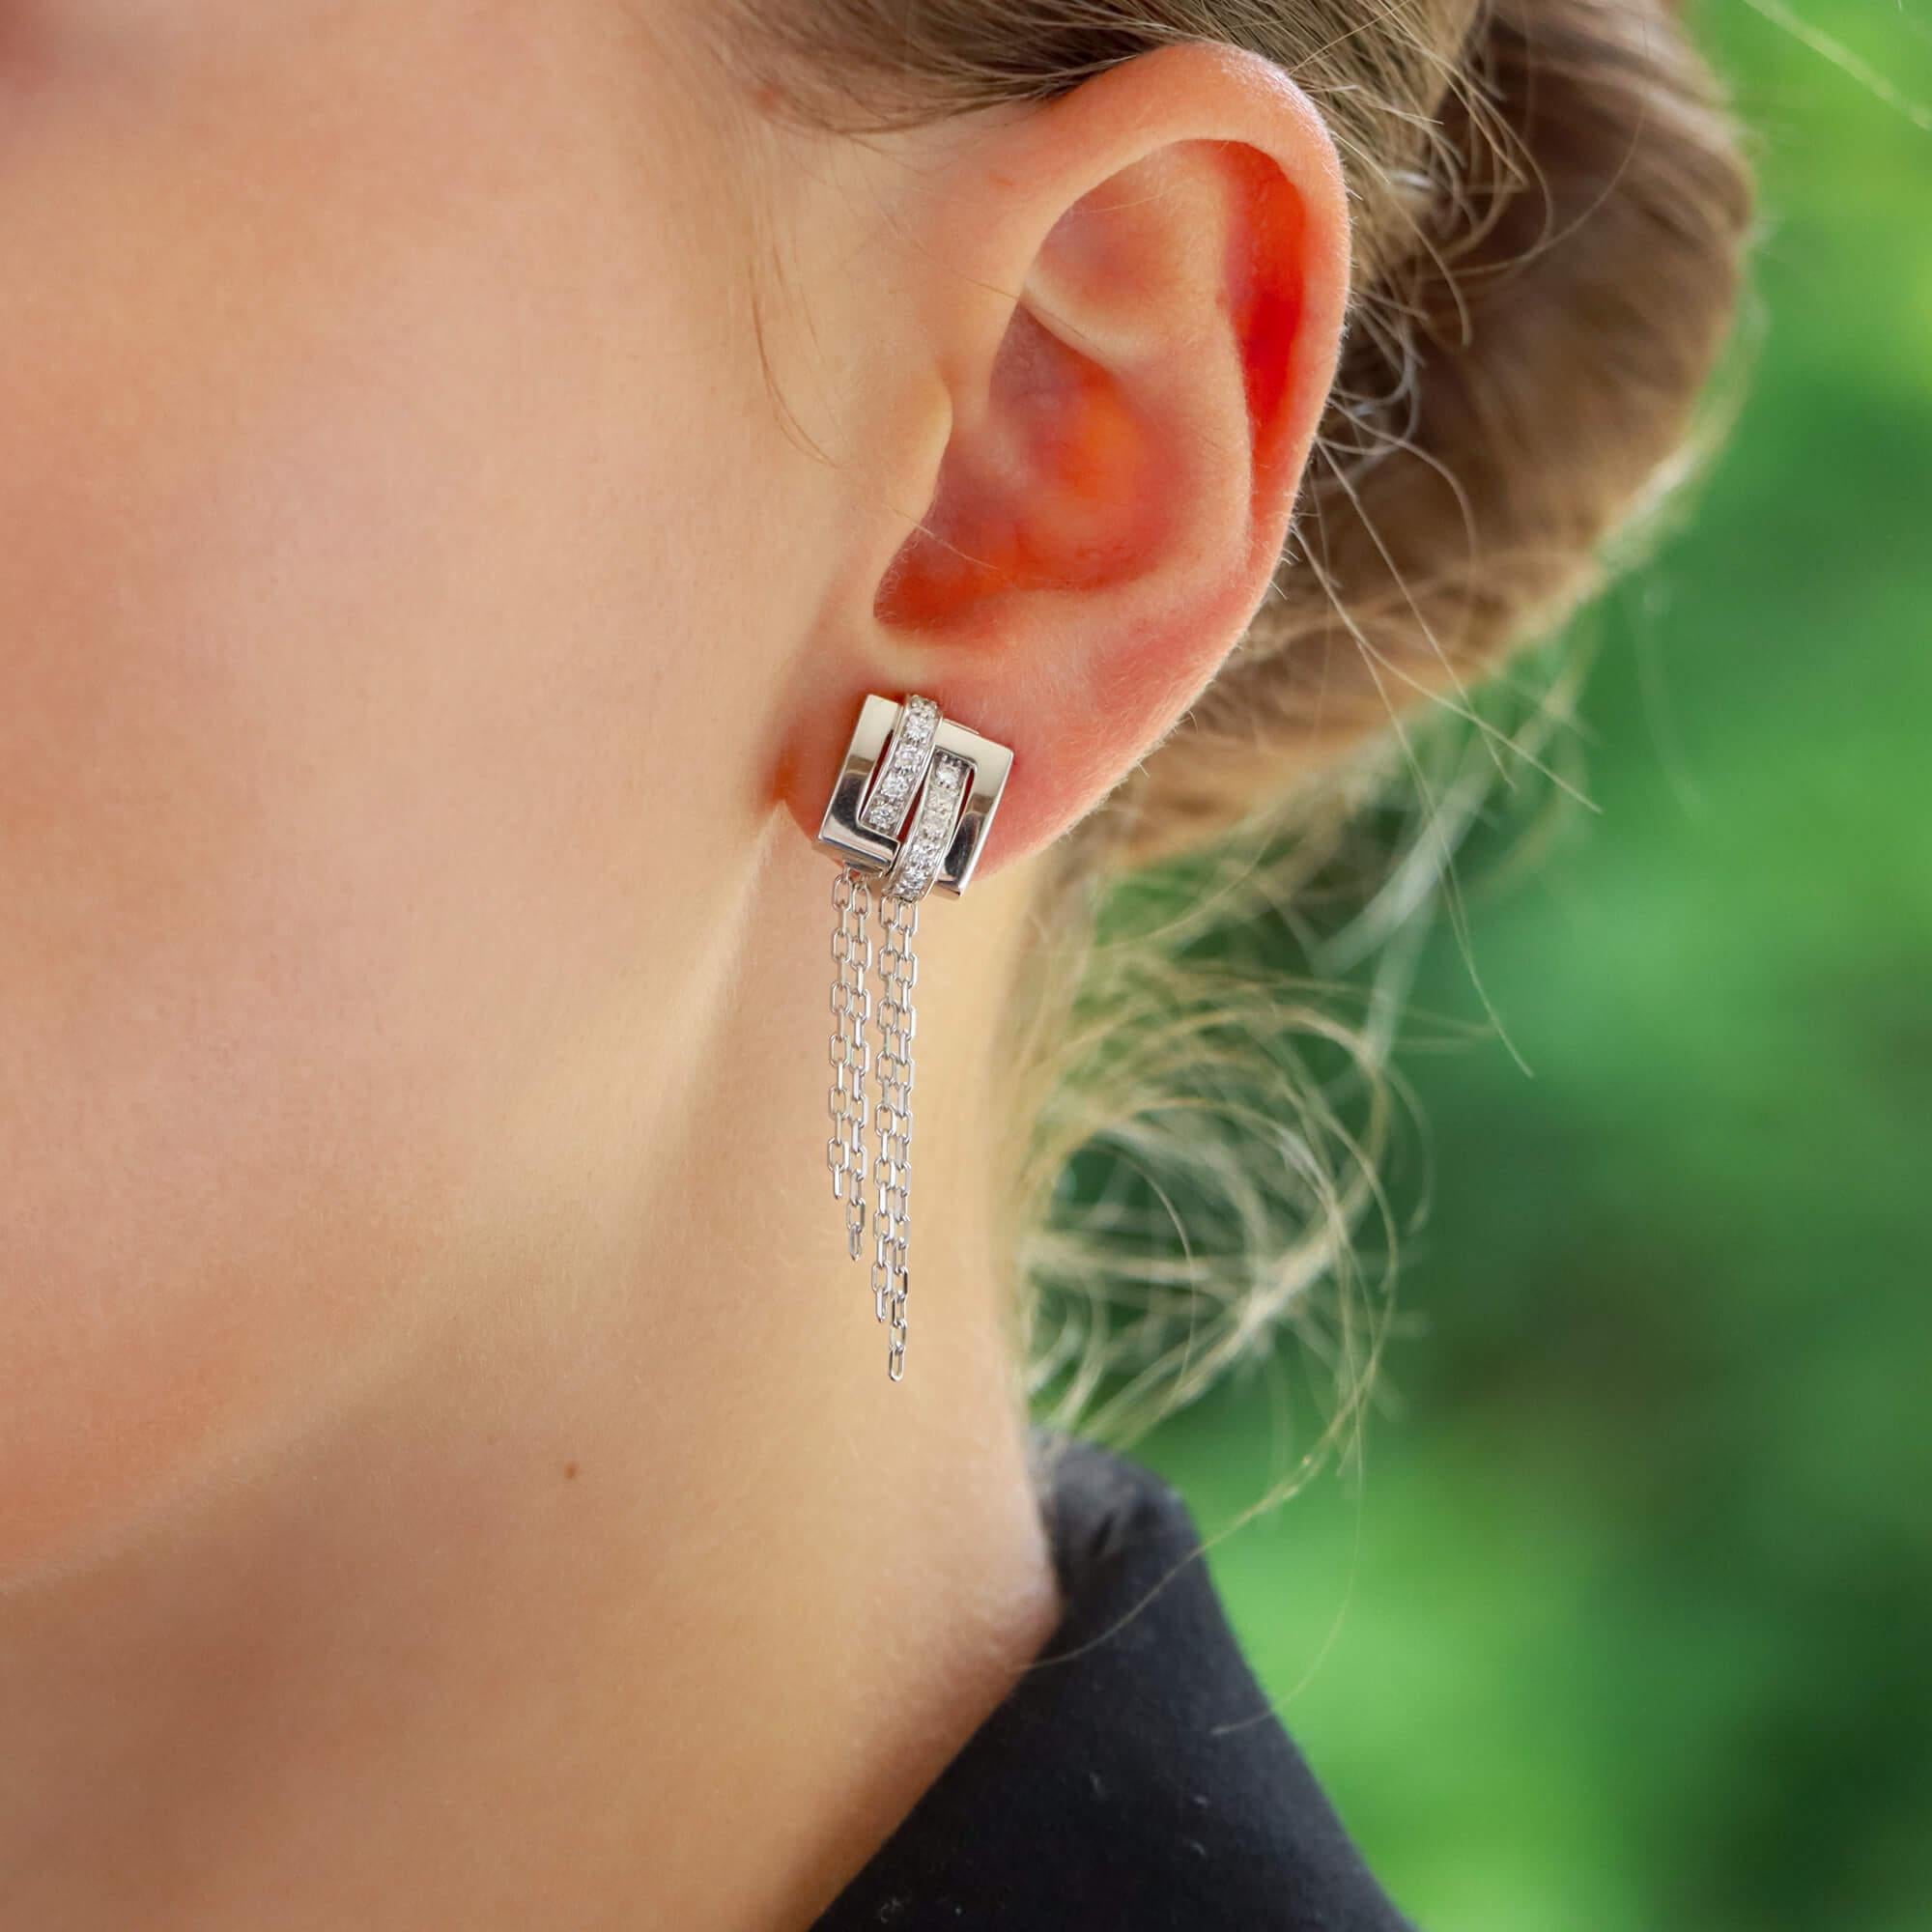  A beautiful pair of vintage Boucheron 'Dechainee' diamond drop earrings set in 18k white gold.

From the now discontinued 'Dechainee' collection, each earring is firstly composed of a geometric squared design. The design is set with a sequence of